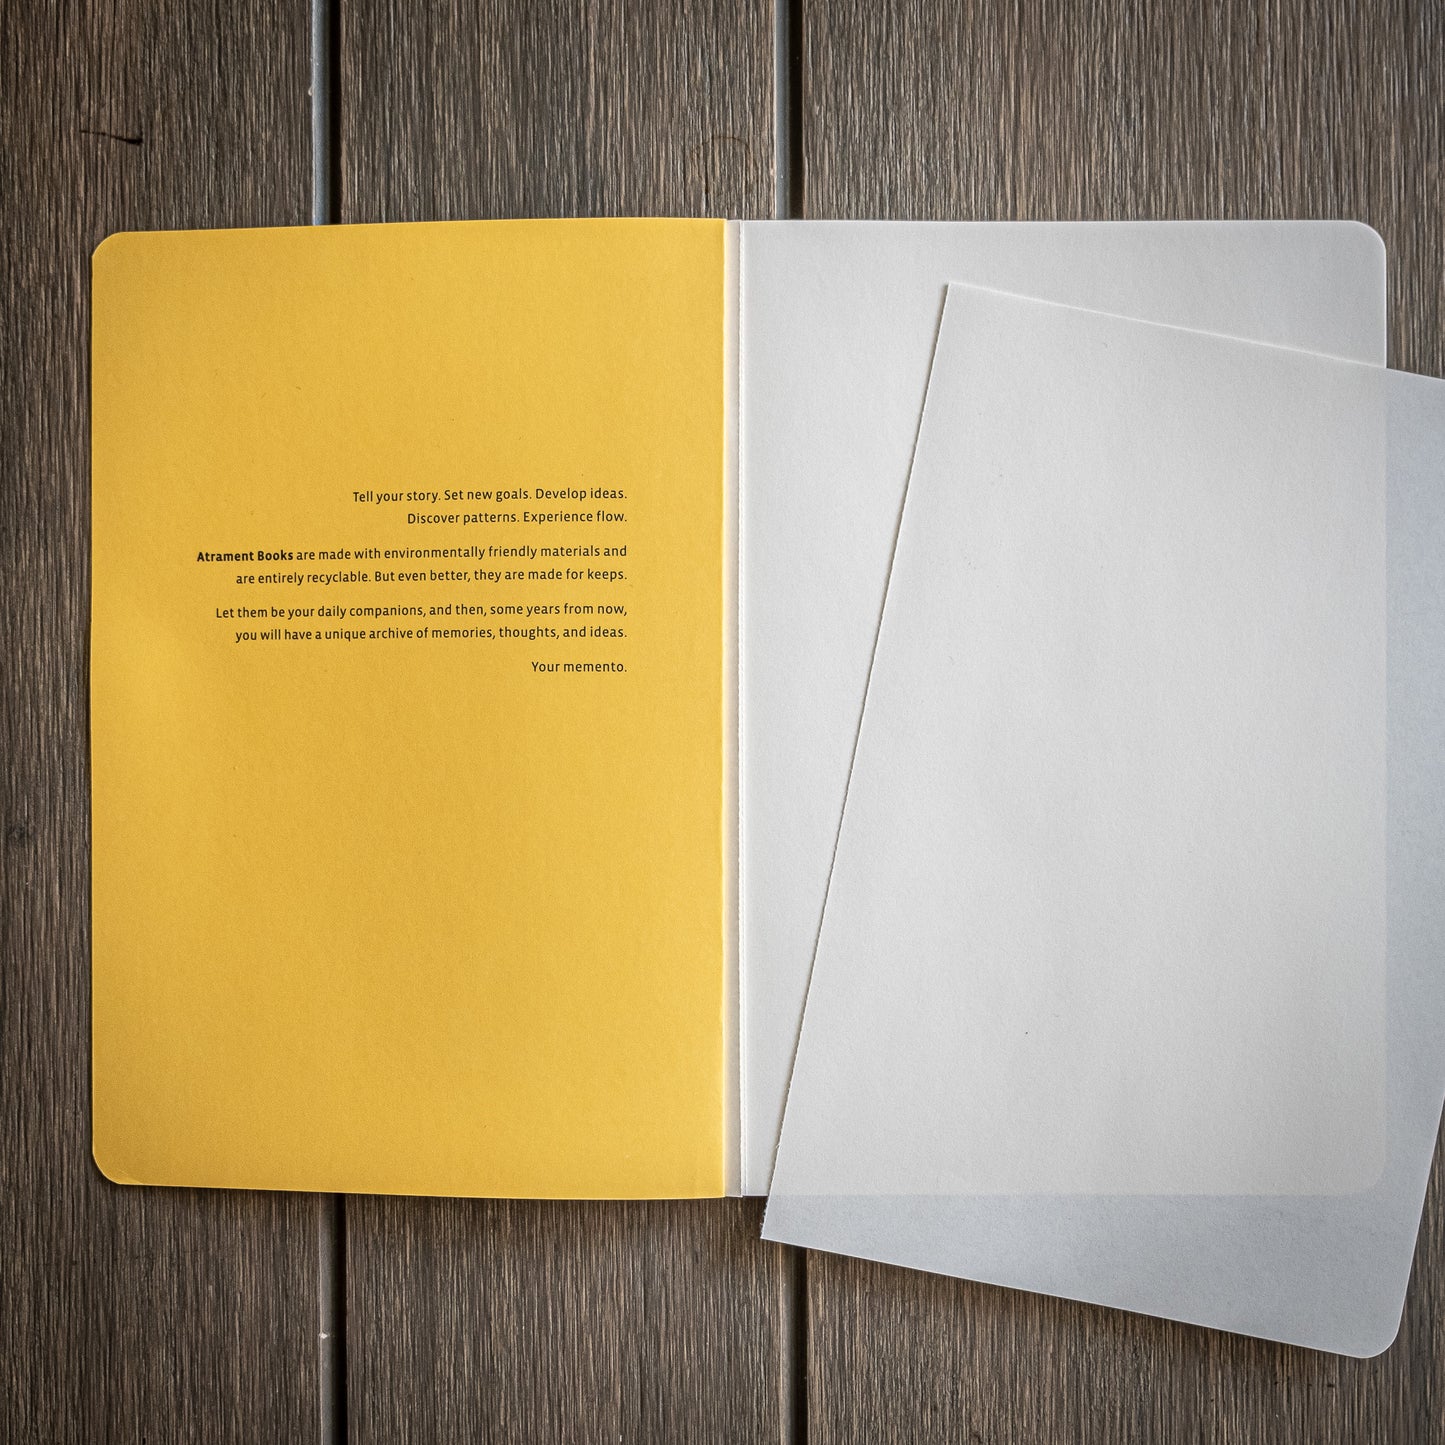 Atrament Sketchbook with blank tear-off sheets for sketching, drawing, or freehand doodling.